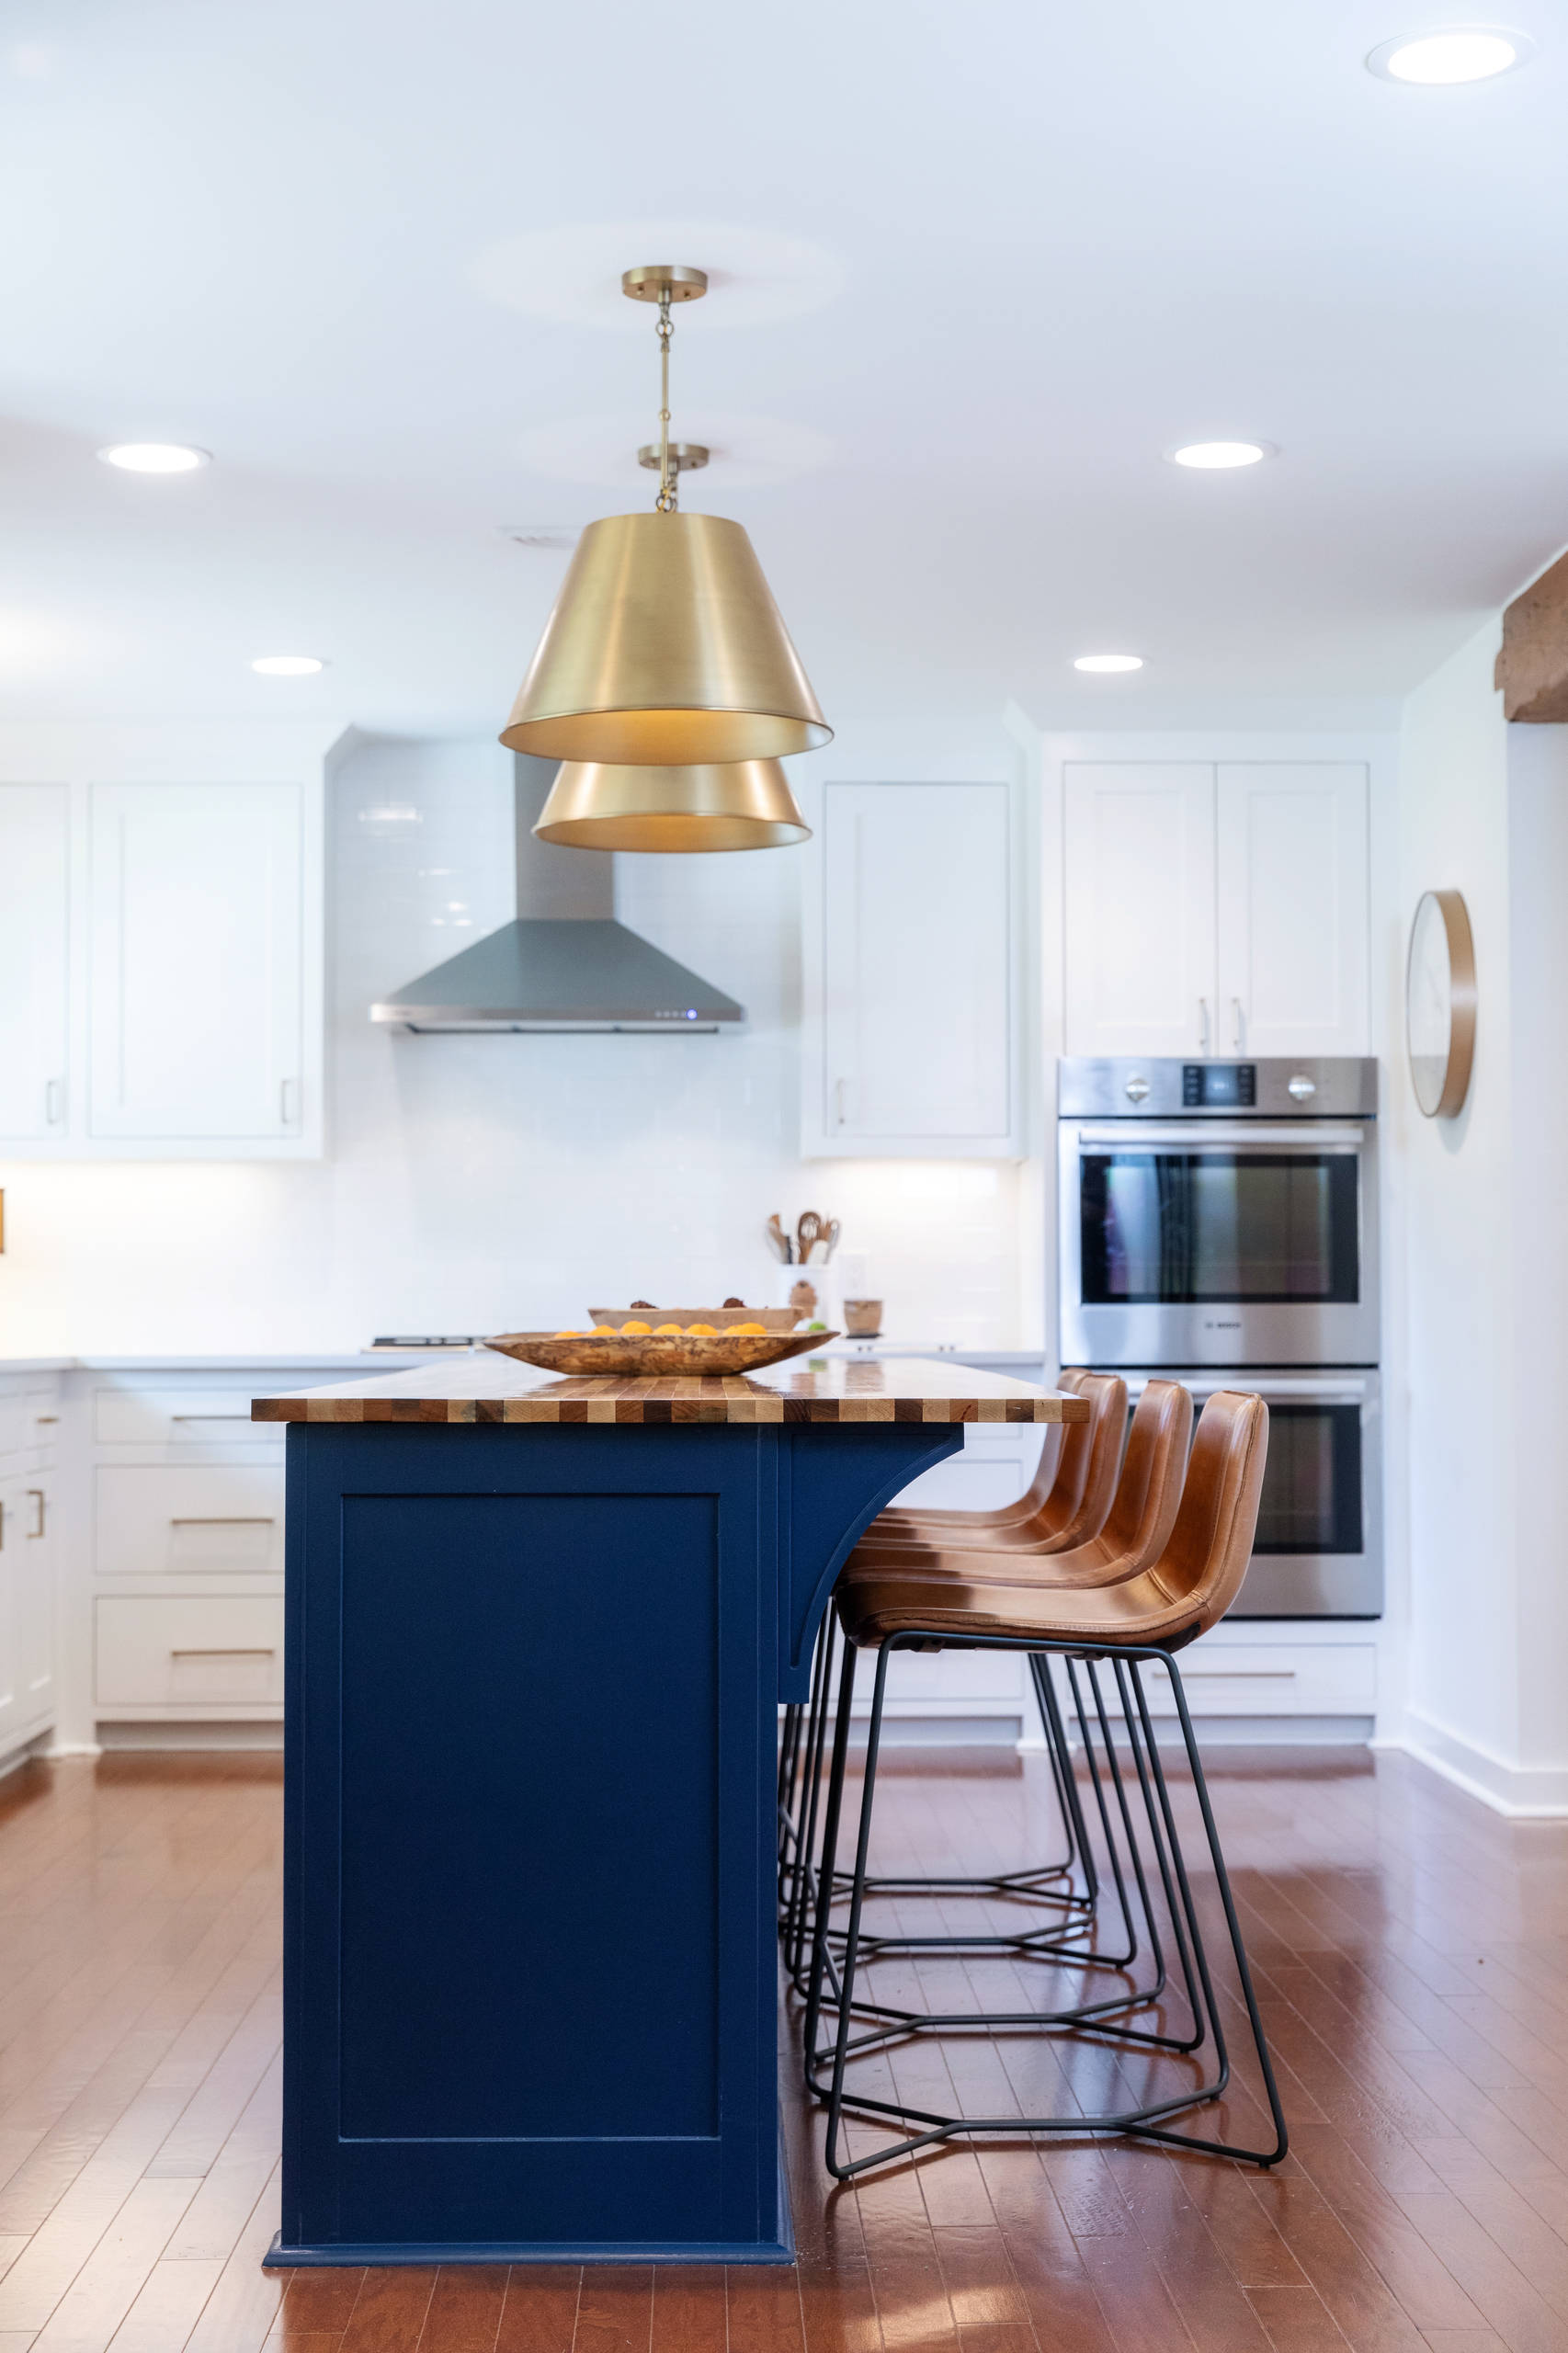 Blue kitchen island with seating. Wooden counter top. Gold pendant lights to brighten space. Gold fixtures to complement the blue paint. Stainless steel appliances. Medium hardwood flooring. White cab